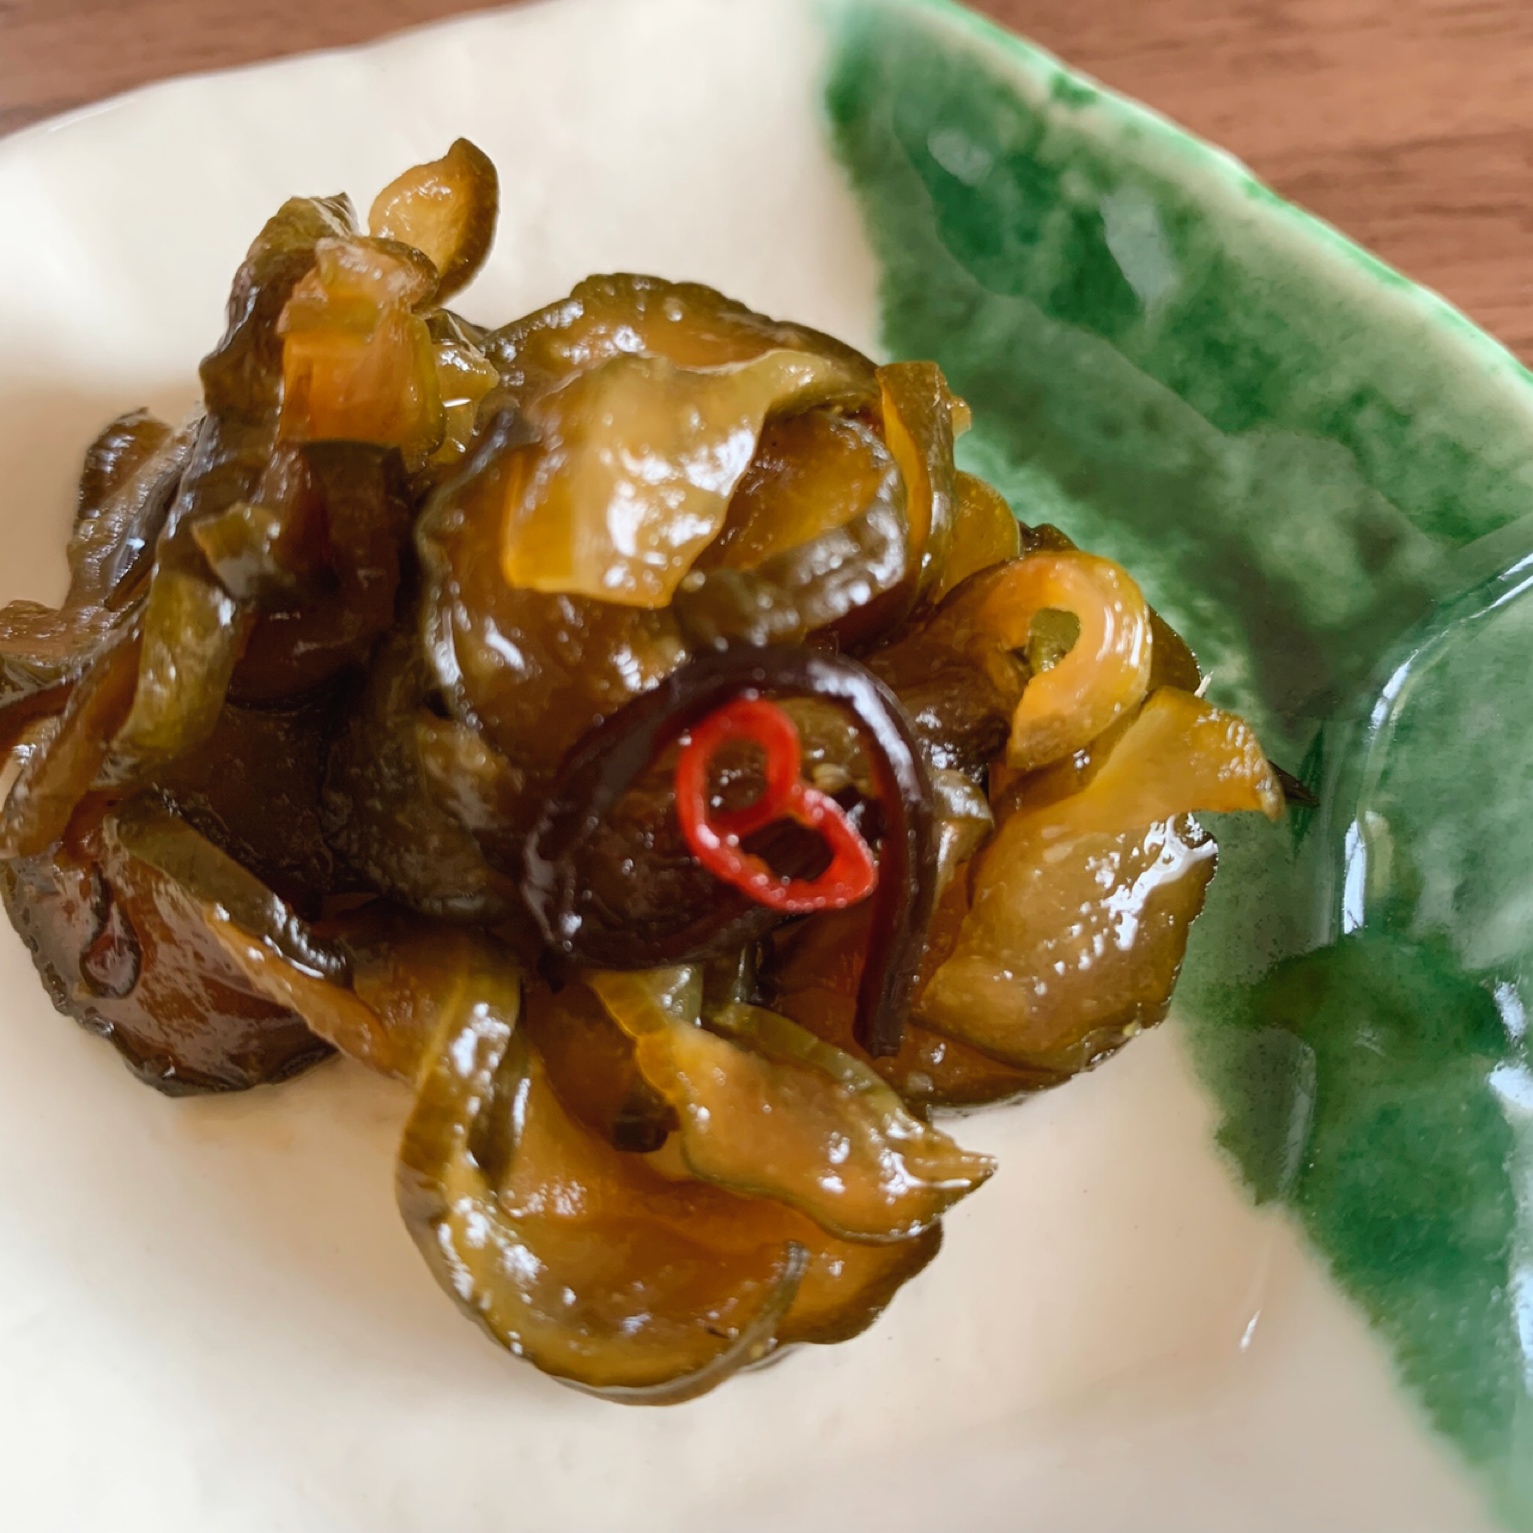 Crispy cucumber pickled in soy sauce.